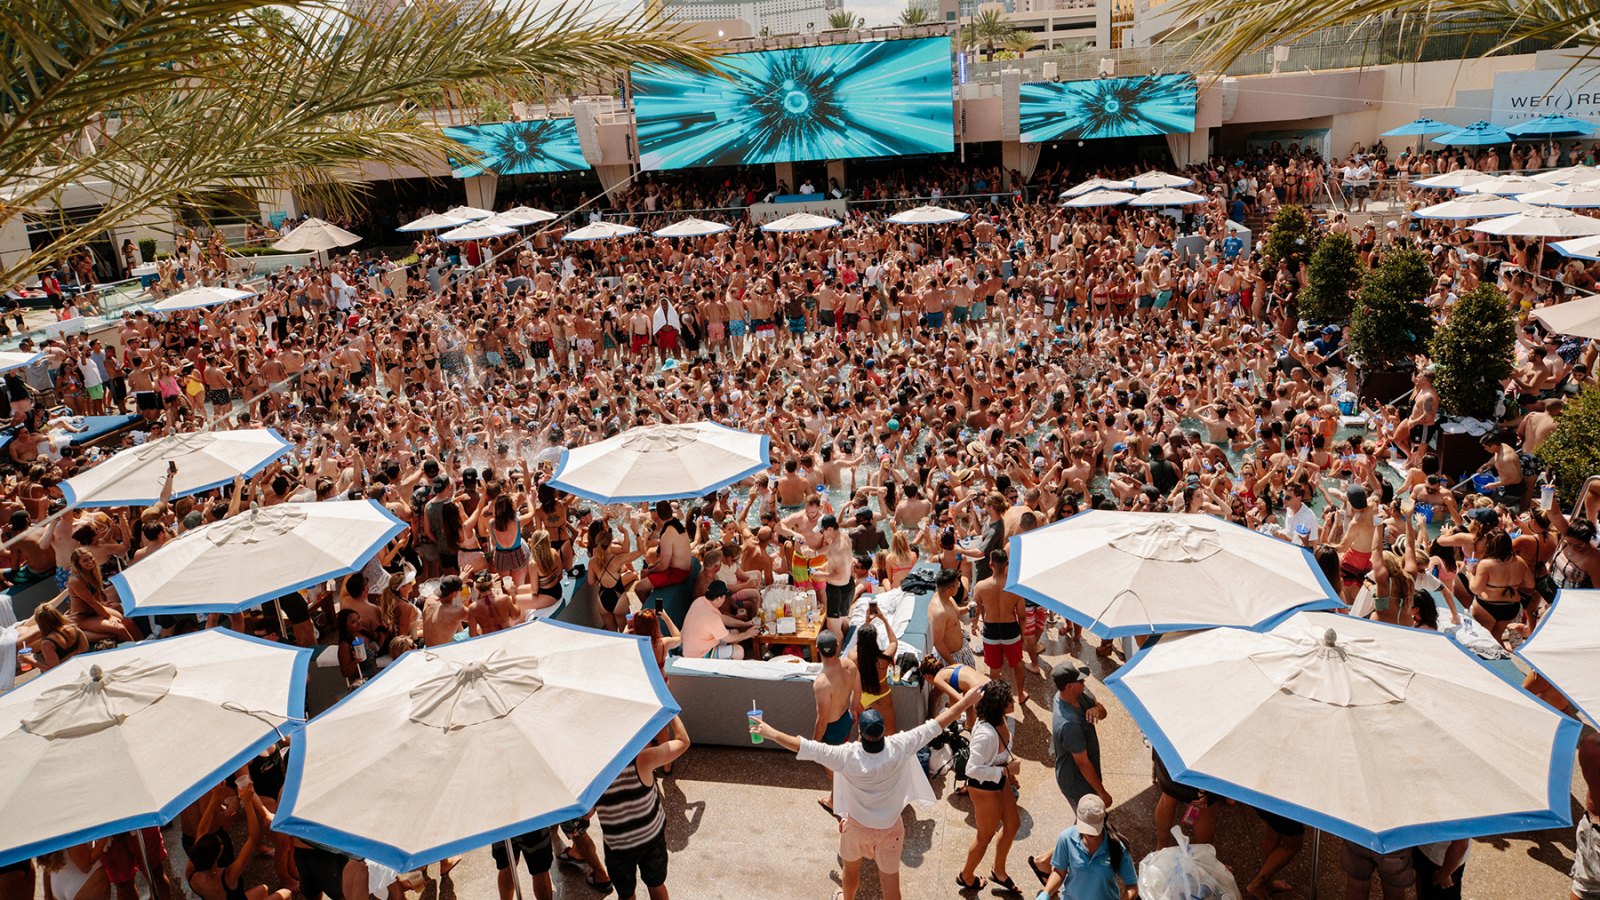 MGM Grand’s Wet Republic Ultra Pool to Get Multi-Million Dollar Makeover